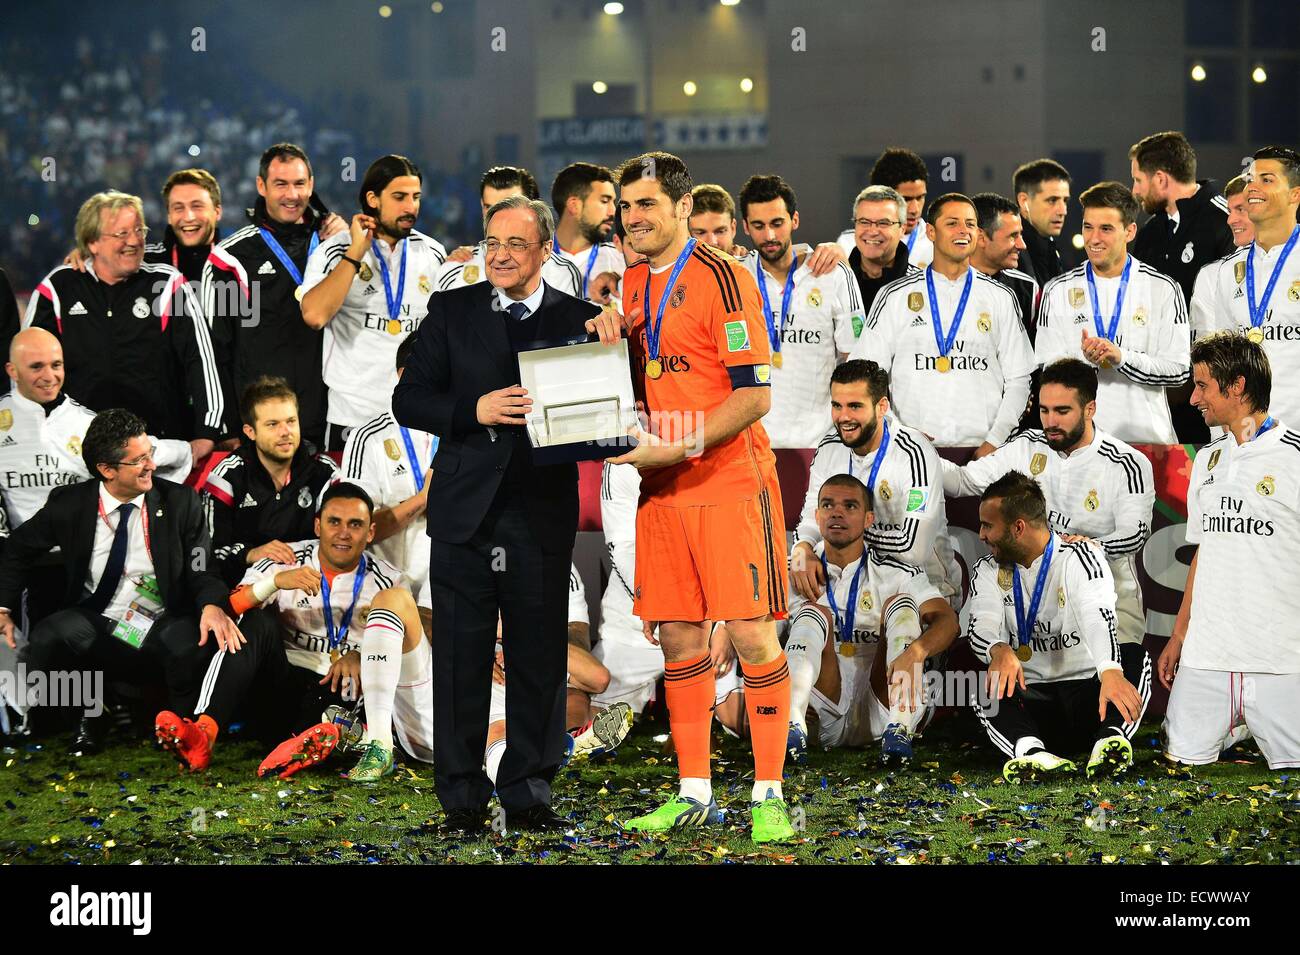 Marrakech, Morocco. 20th Dec, 2014. Real Madrid CF president FLORENTINO PEREZ and IKER CASILLAS celebrating the match number 700 with Real Madrid with the trophy after win the FIFA Club World Cup 2014 in Marrakech. Credit:  Marcio Machado/ZUMA Wire/Alamy Live News Stock Photo